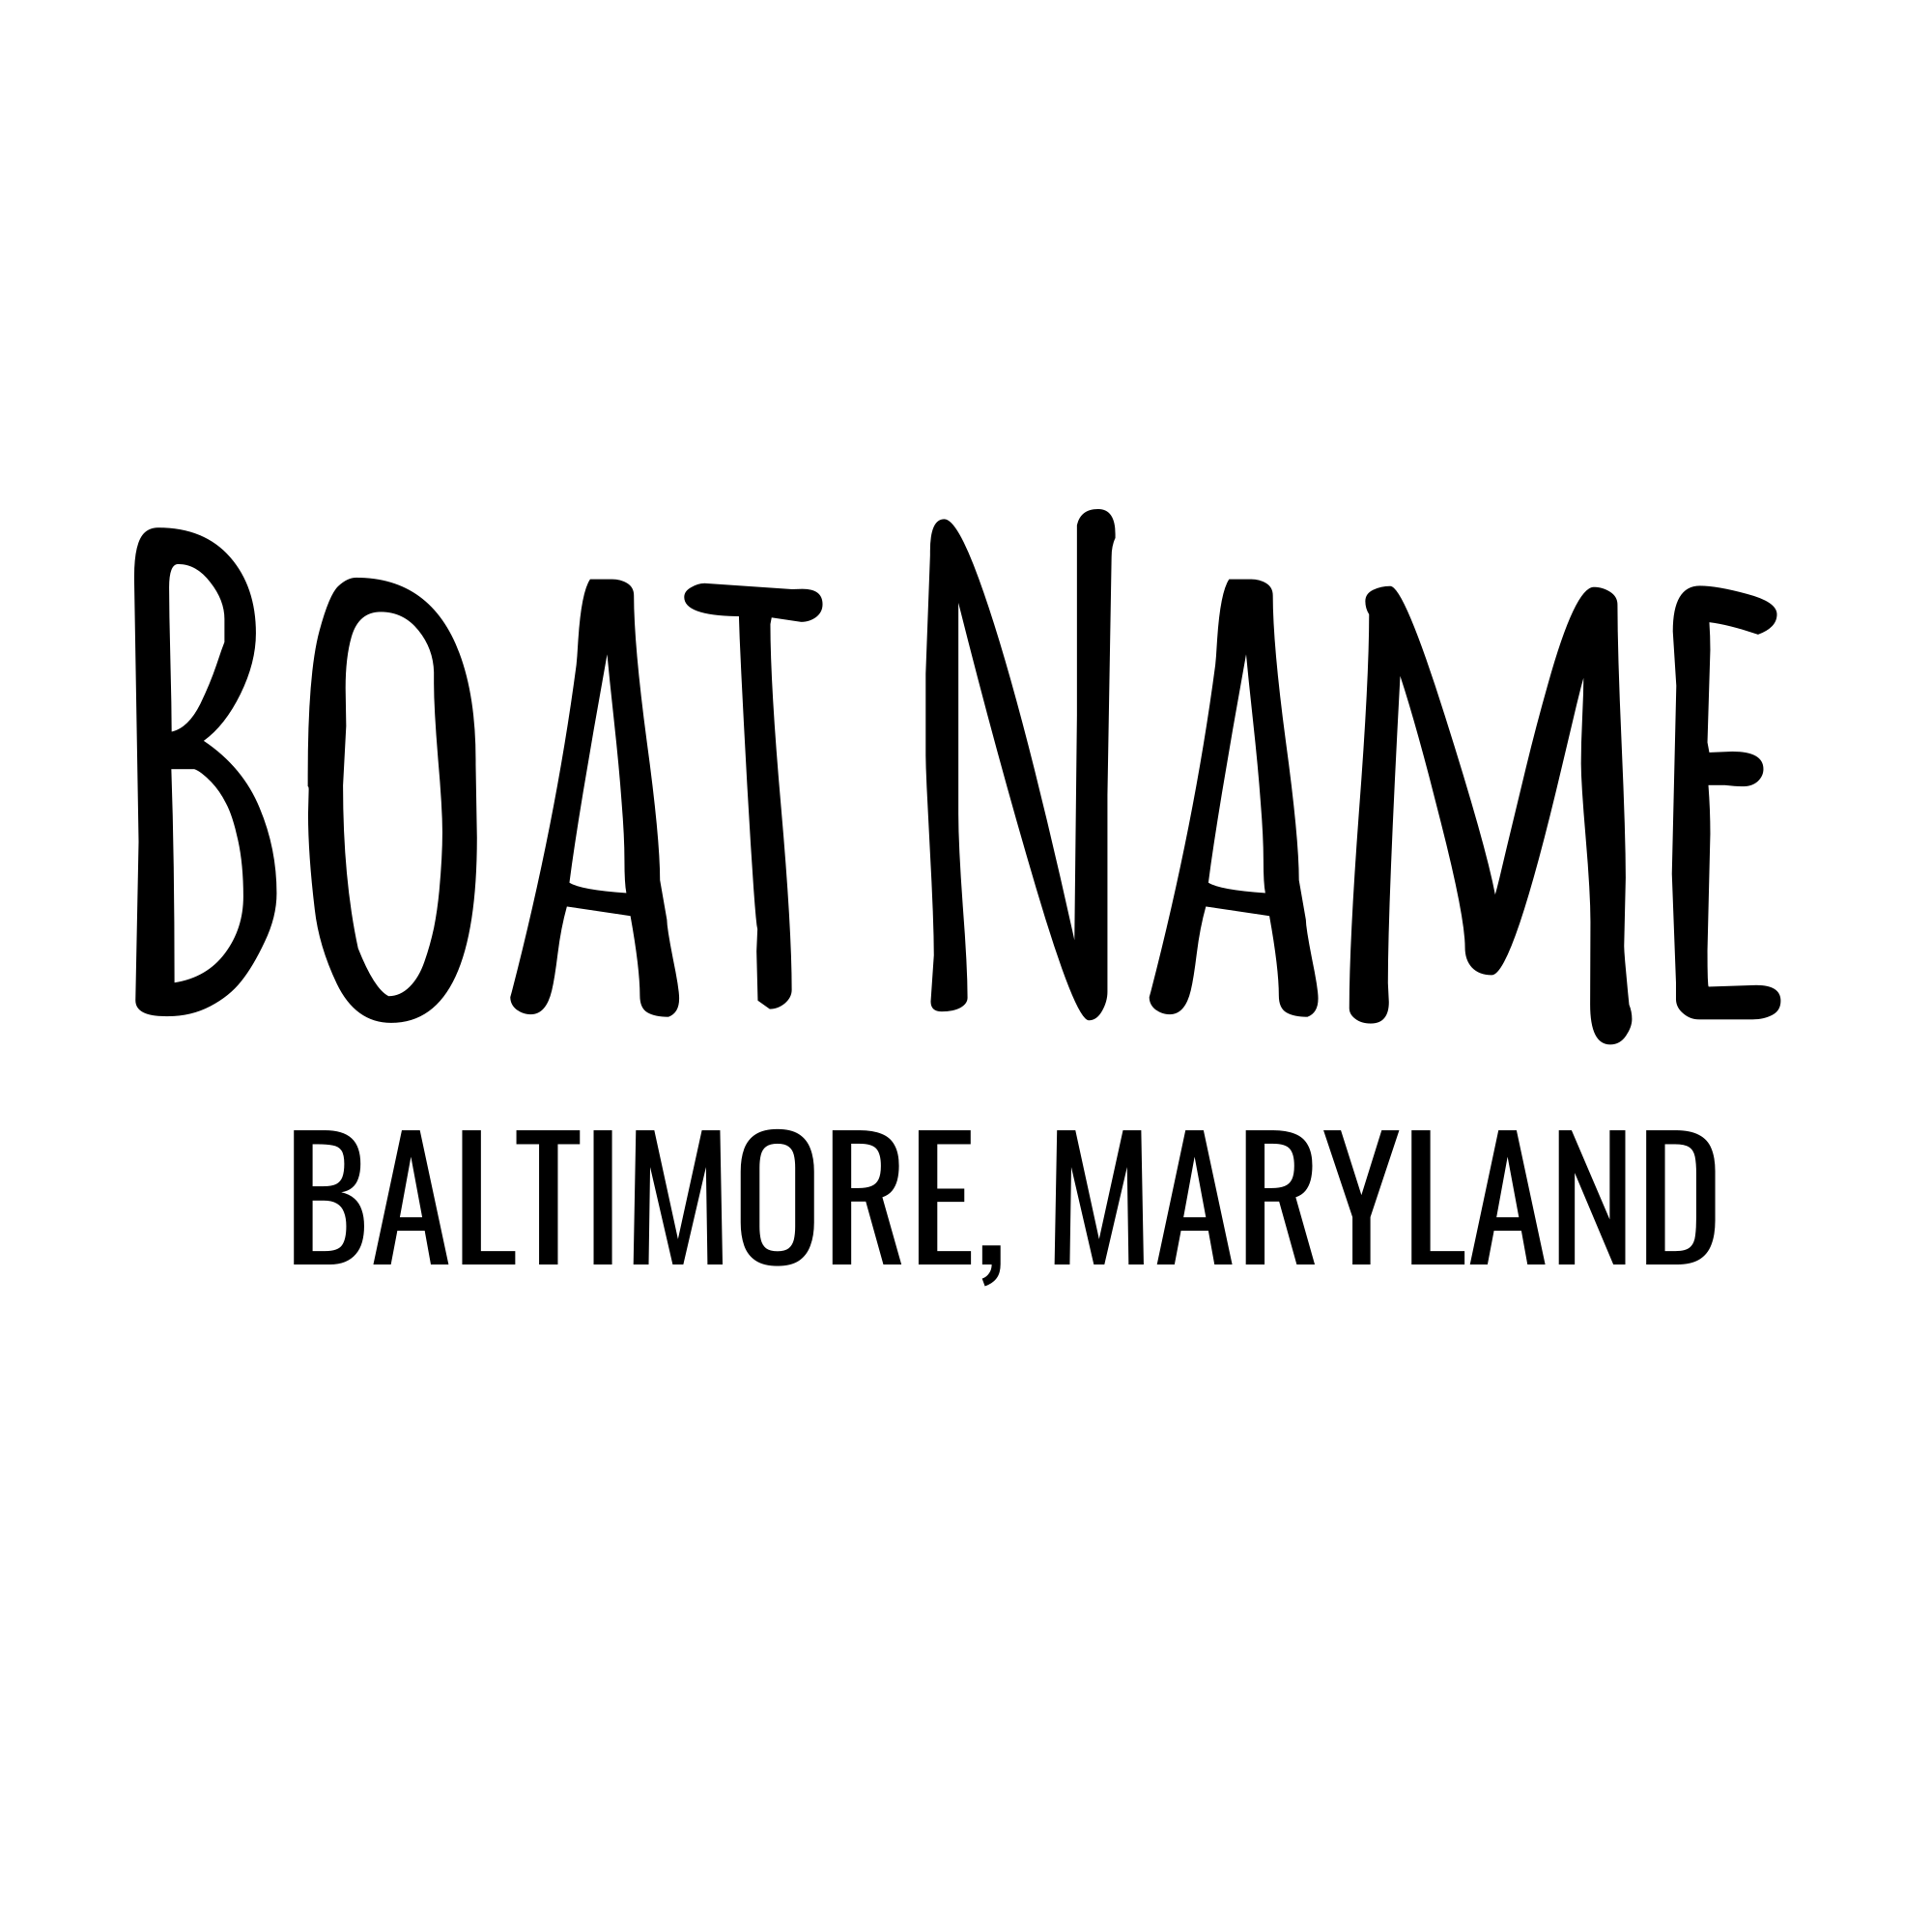 Personalized Boat Name Vinyl Decal with Hailing Port State - Permanent Marine-Grade for Signs, Speed boat, Fishing Vessel, Watercraft B3, B1